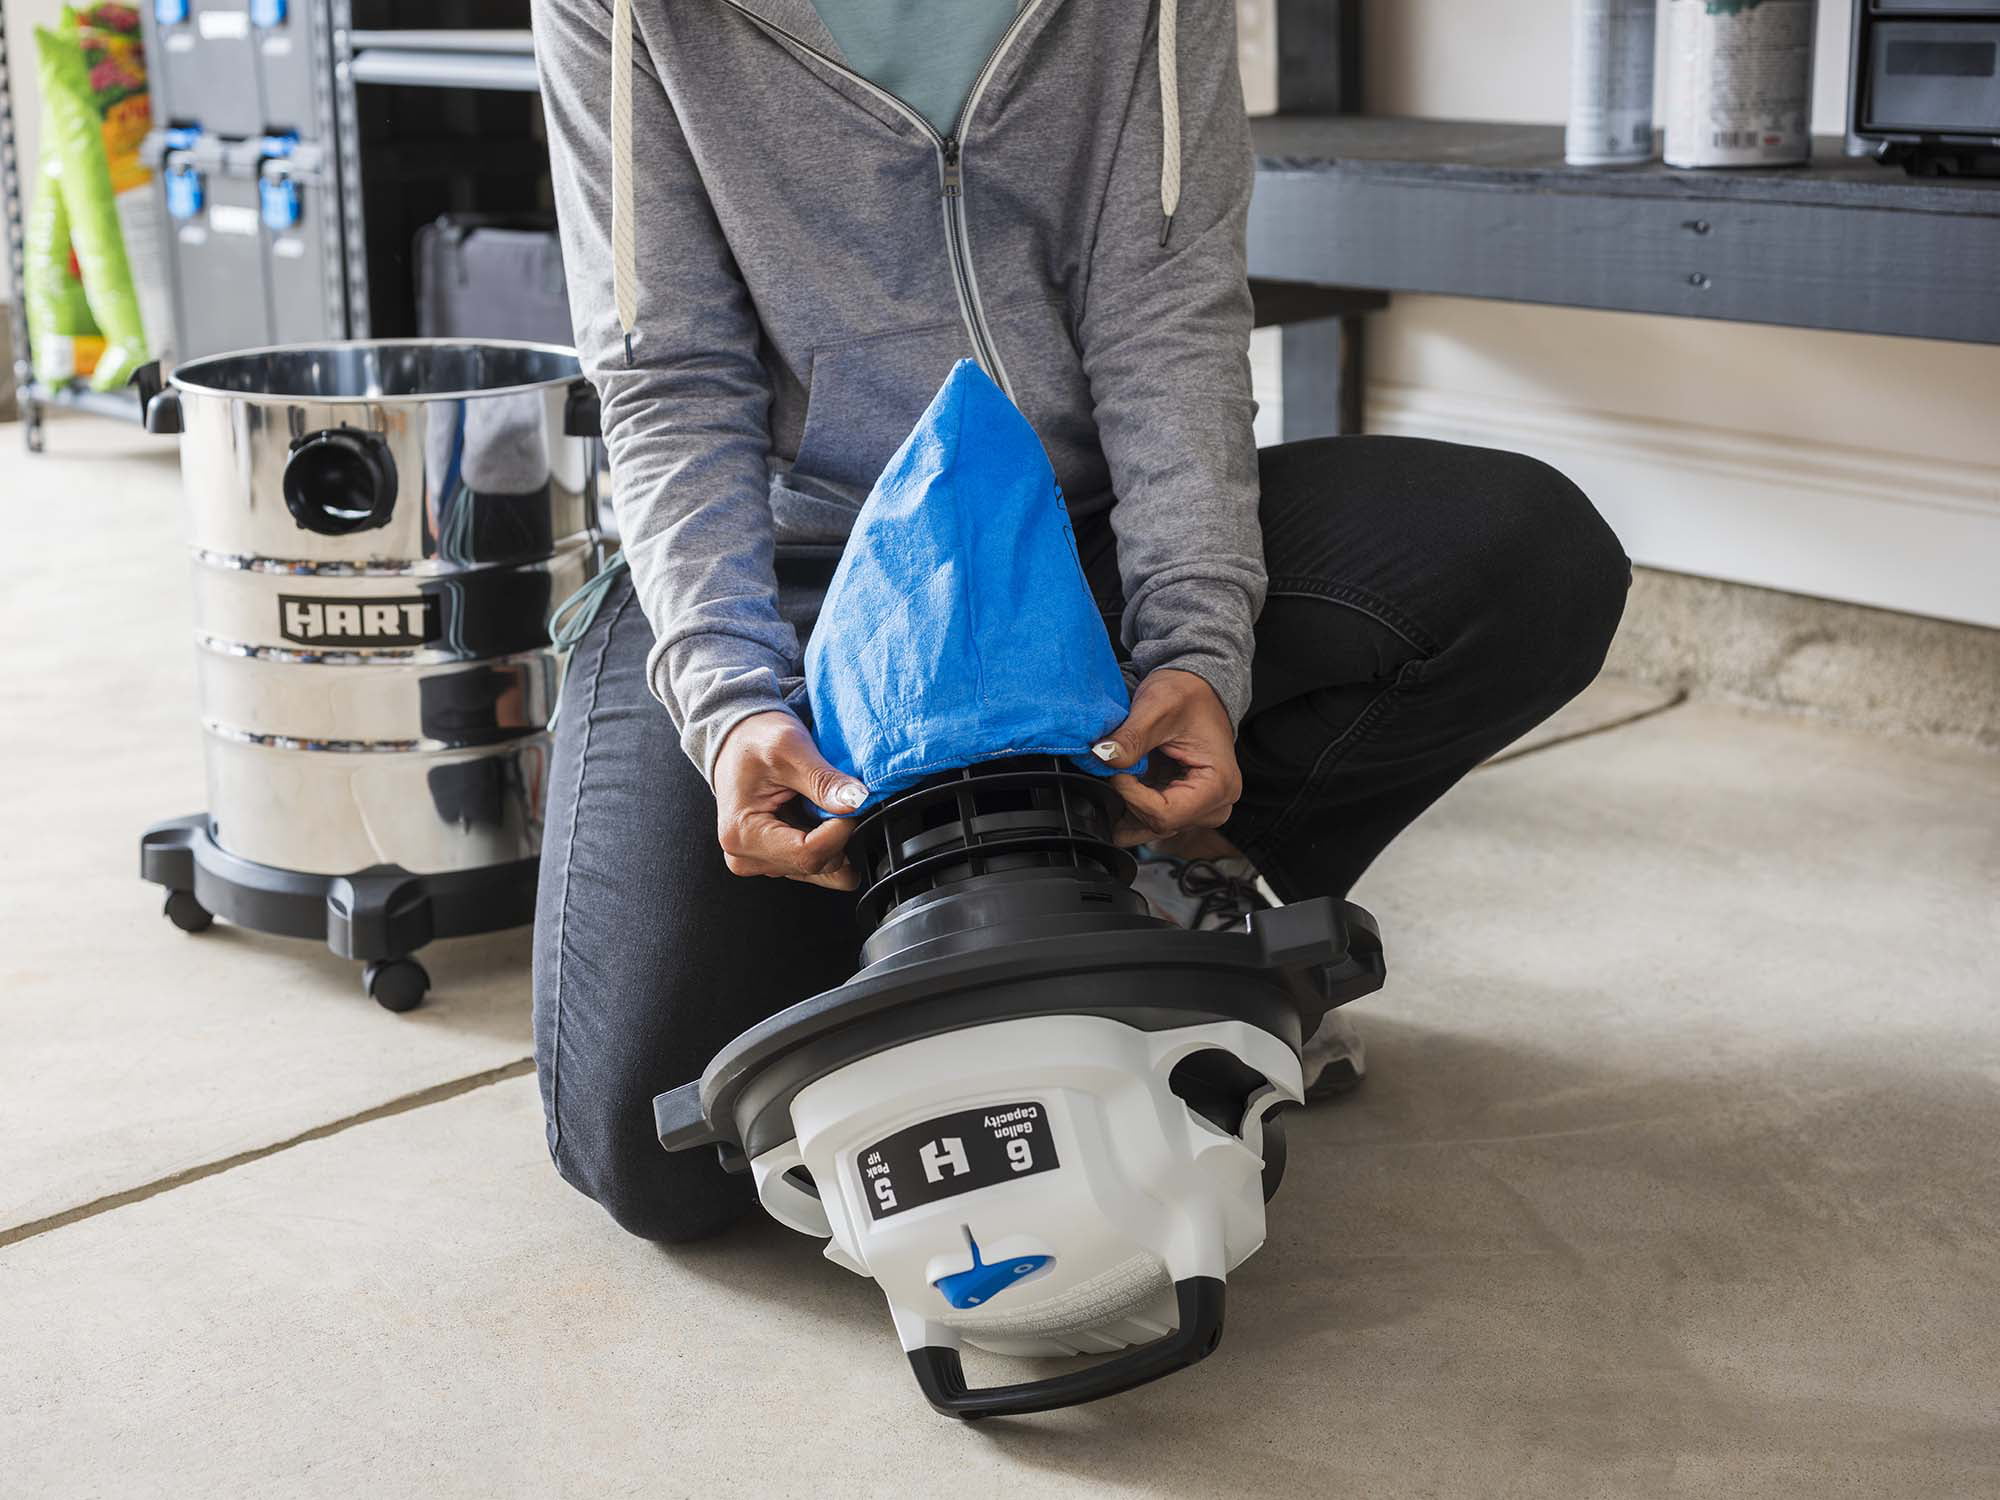 Experience Versatile and Convenient Cleaning with the HART 6 Gallon 5 Peak HP Stainless Steel Vacuum